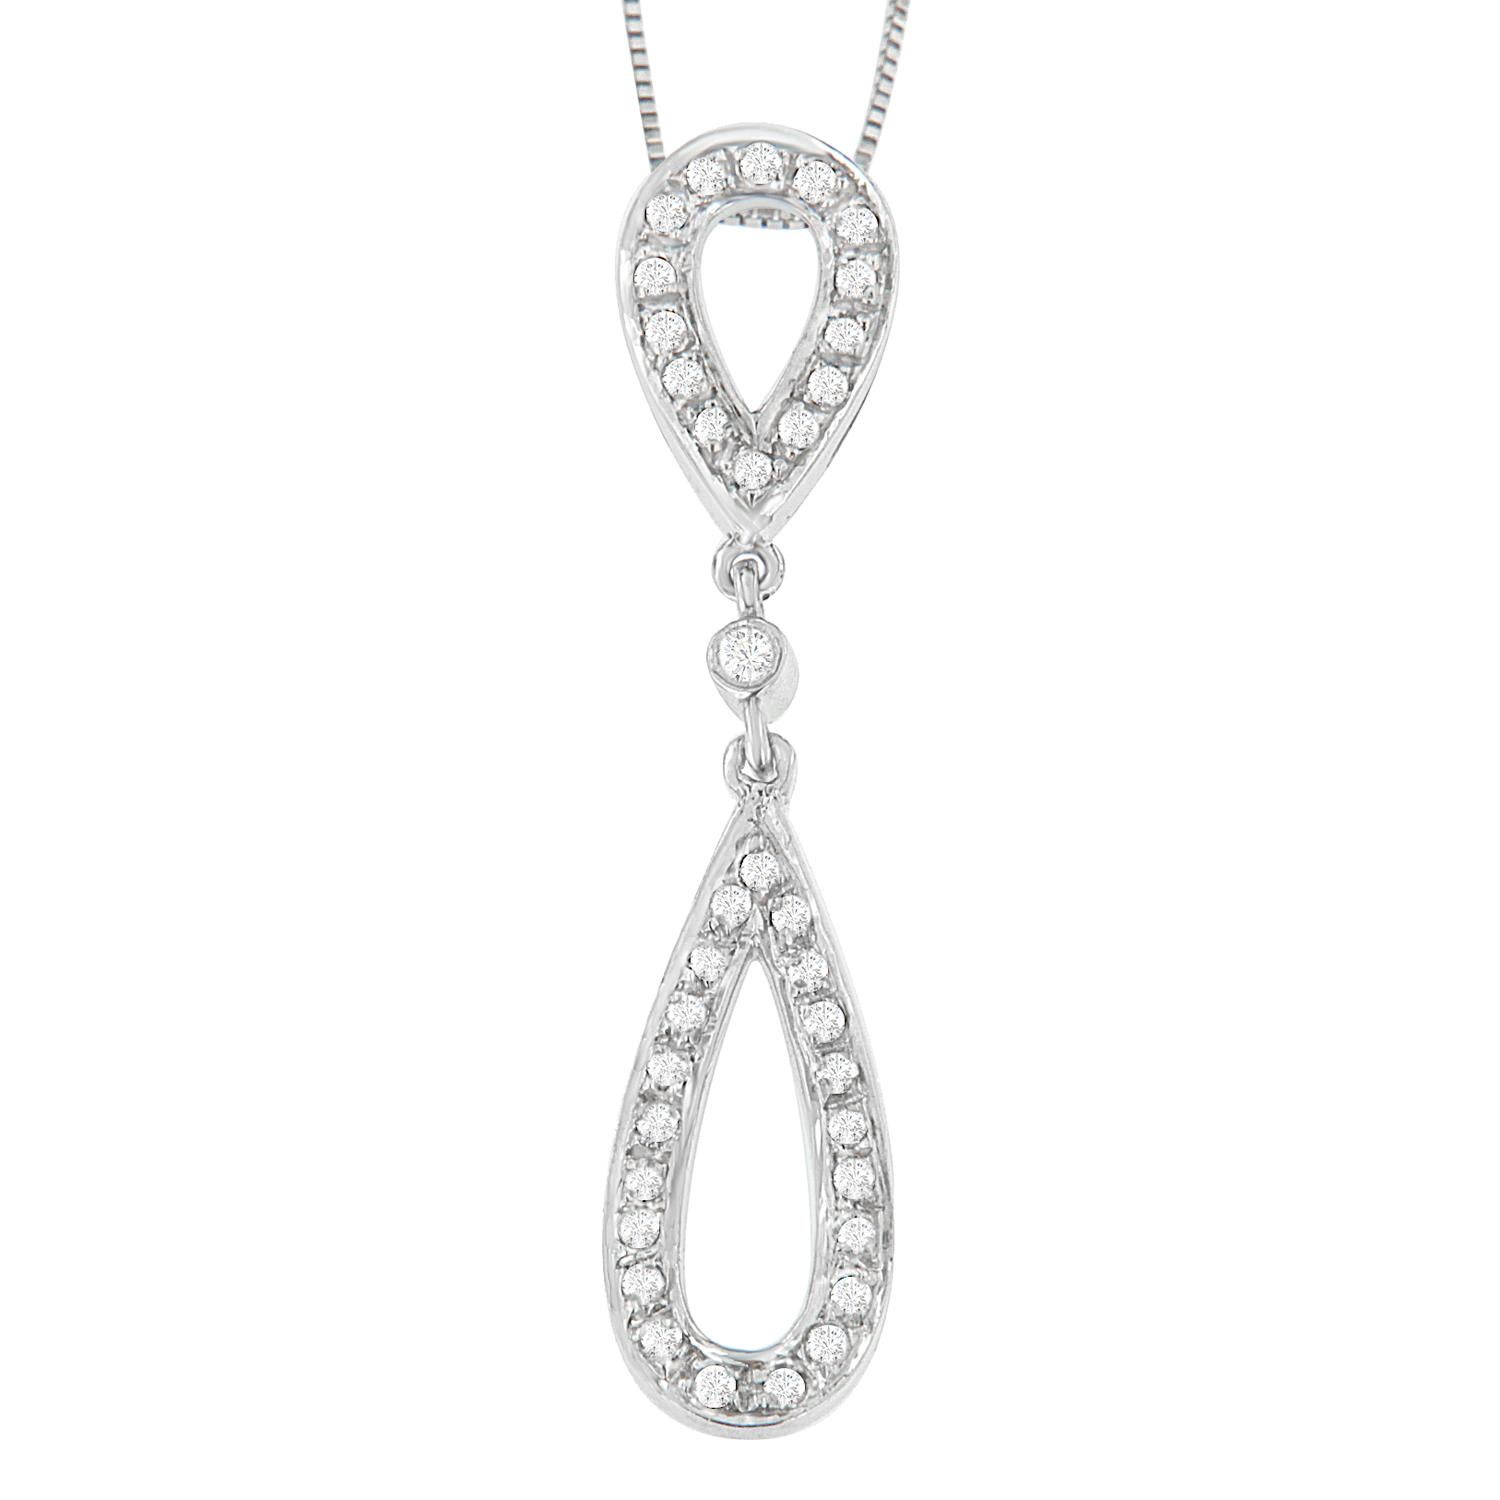 The beauty of this pendant is in the details. A modern 14 karat white gold setting connects two tear drop shapes at top and bottom, which are covered in glittering round cut diamonds for an extra dose of drama. This beautiful necklace includes 18”